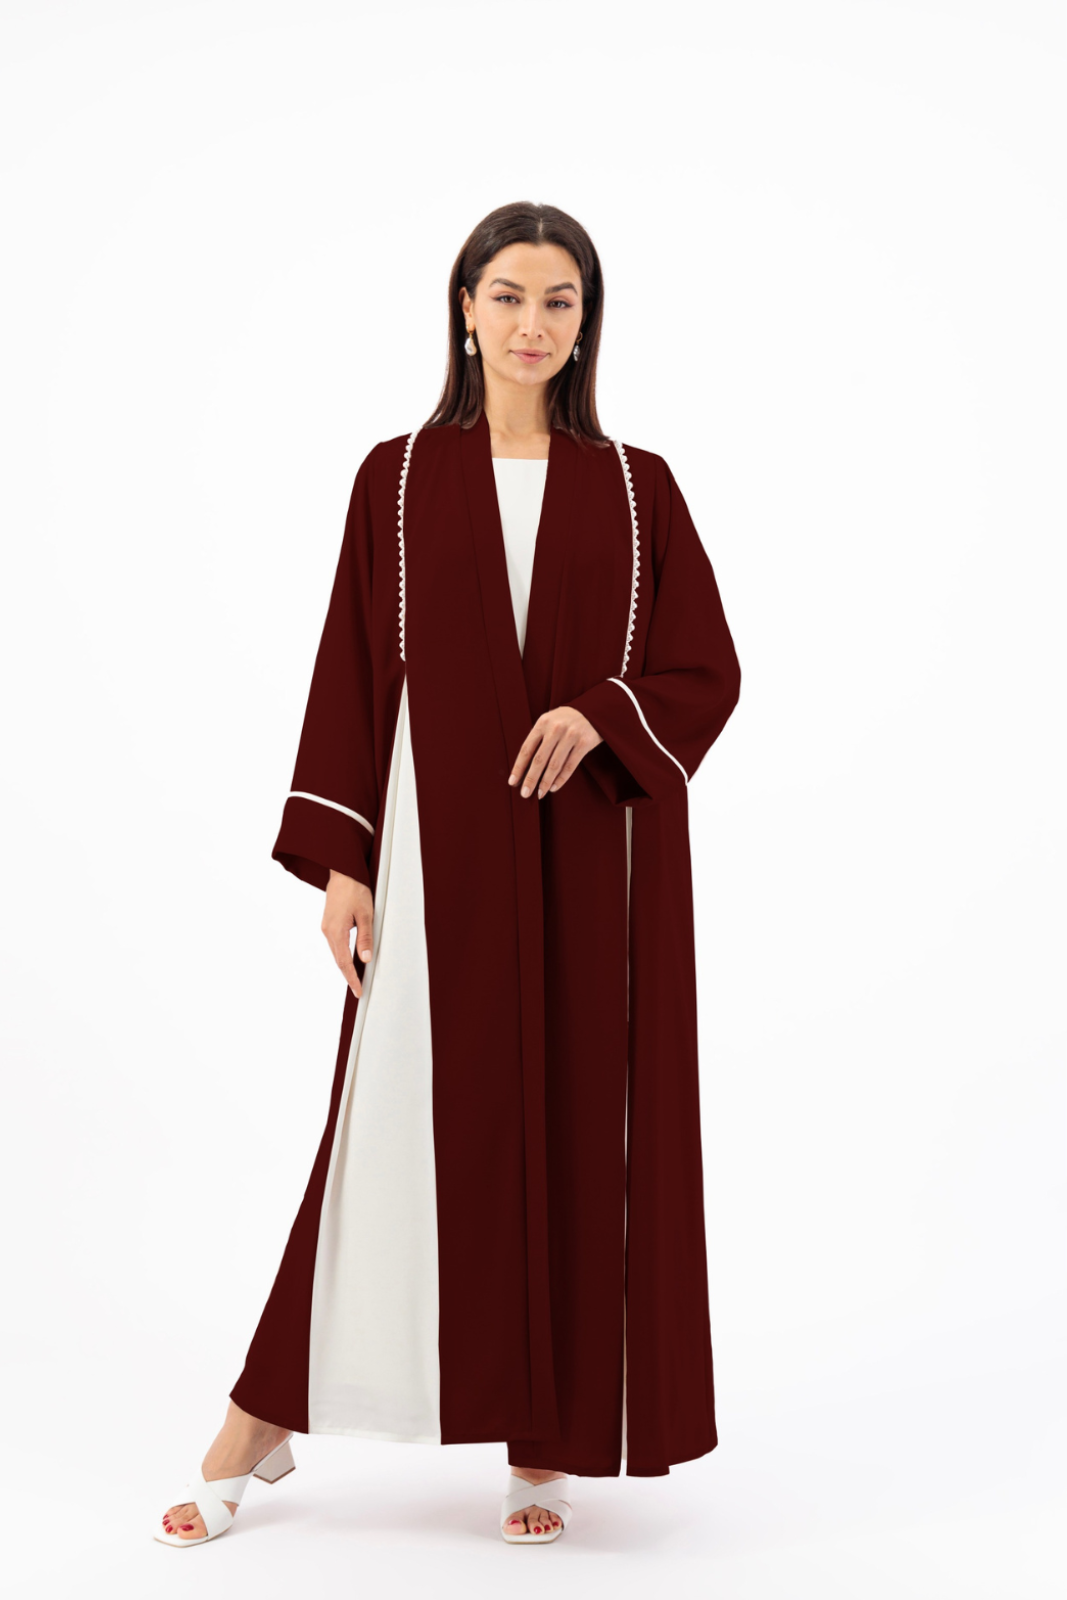 Contrast box pleated Abaya with Pearl piping details